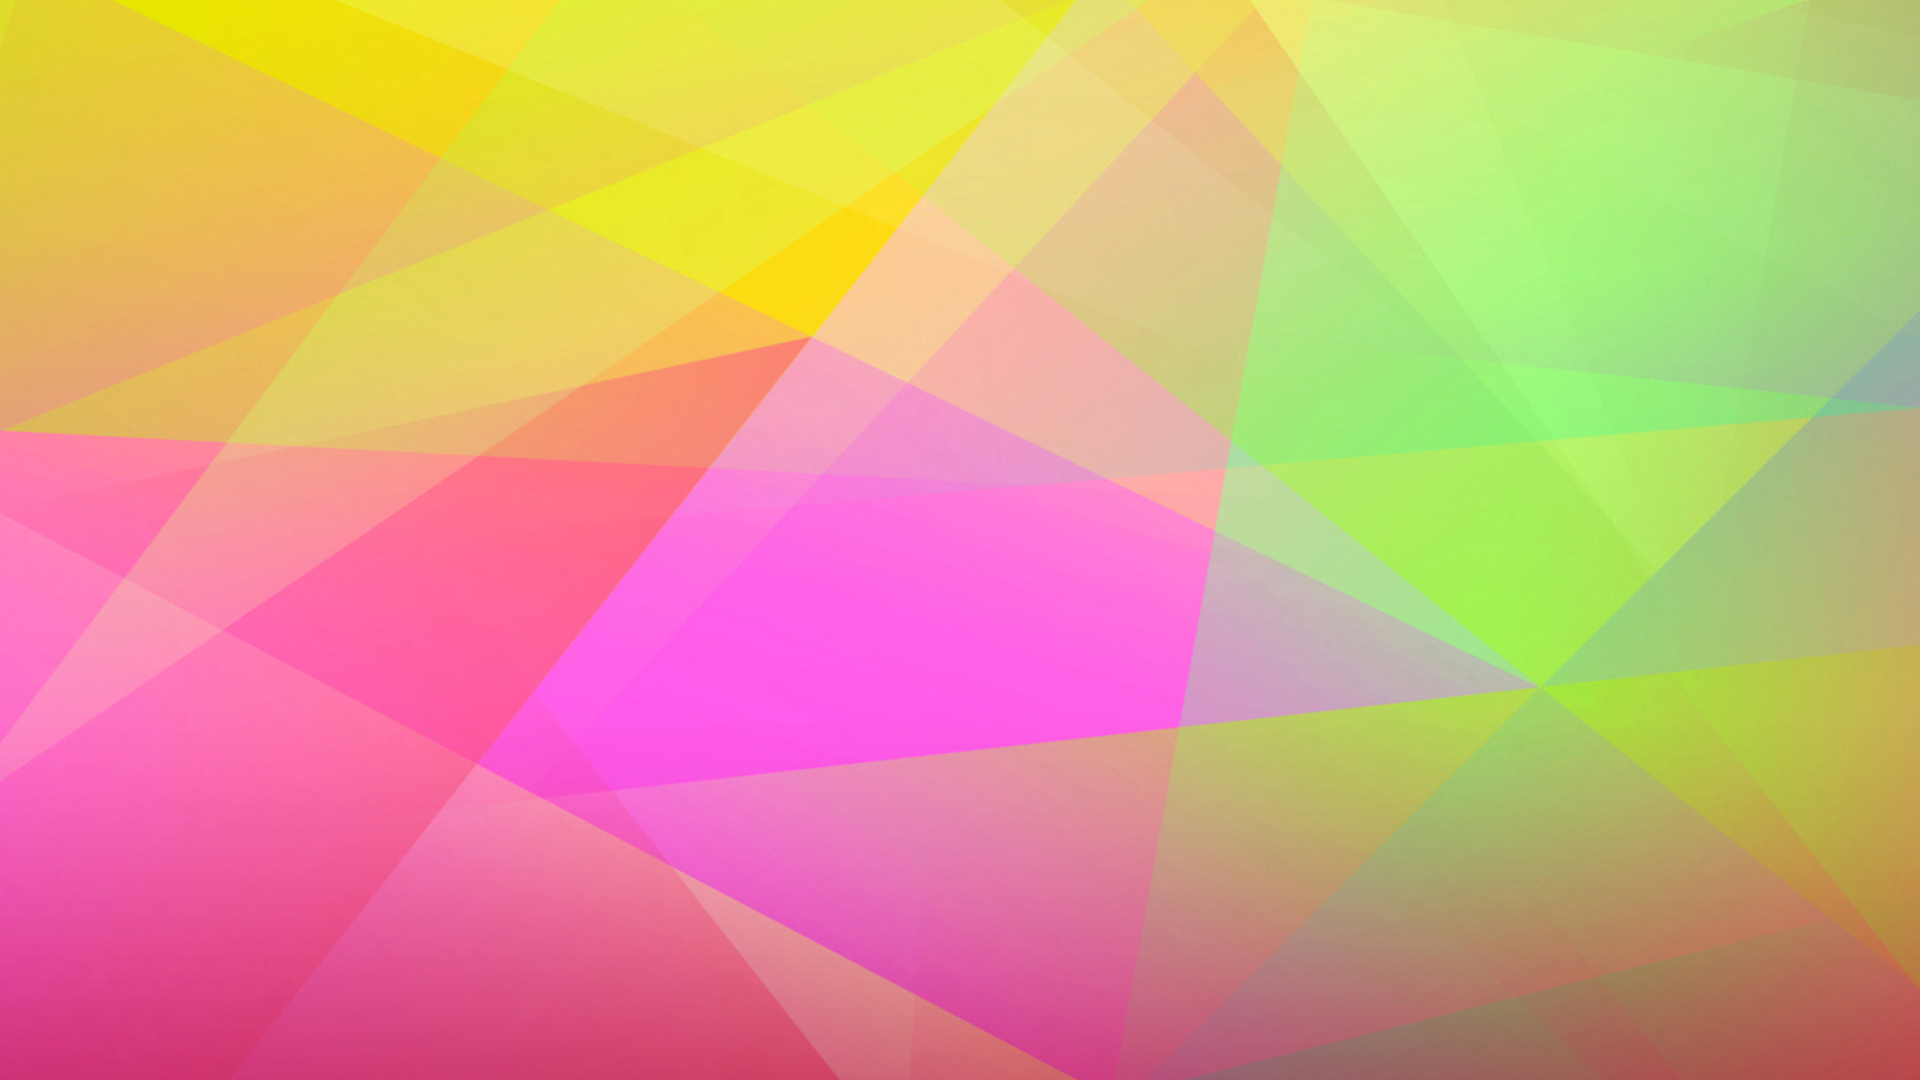 Das Glowing Abstract Wallpaper 1920x1080